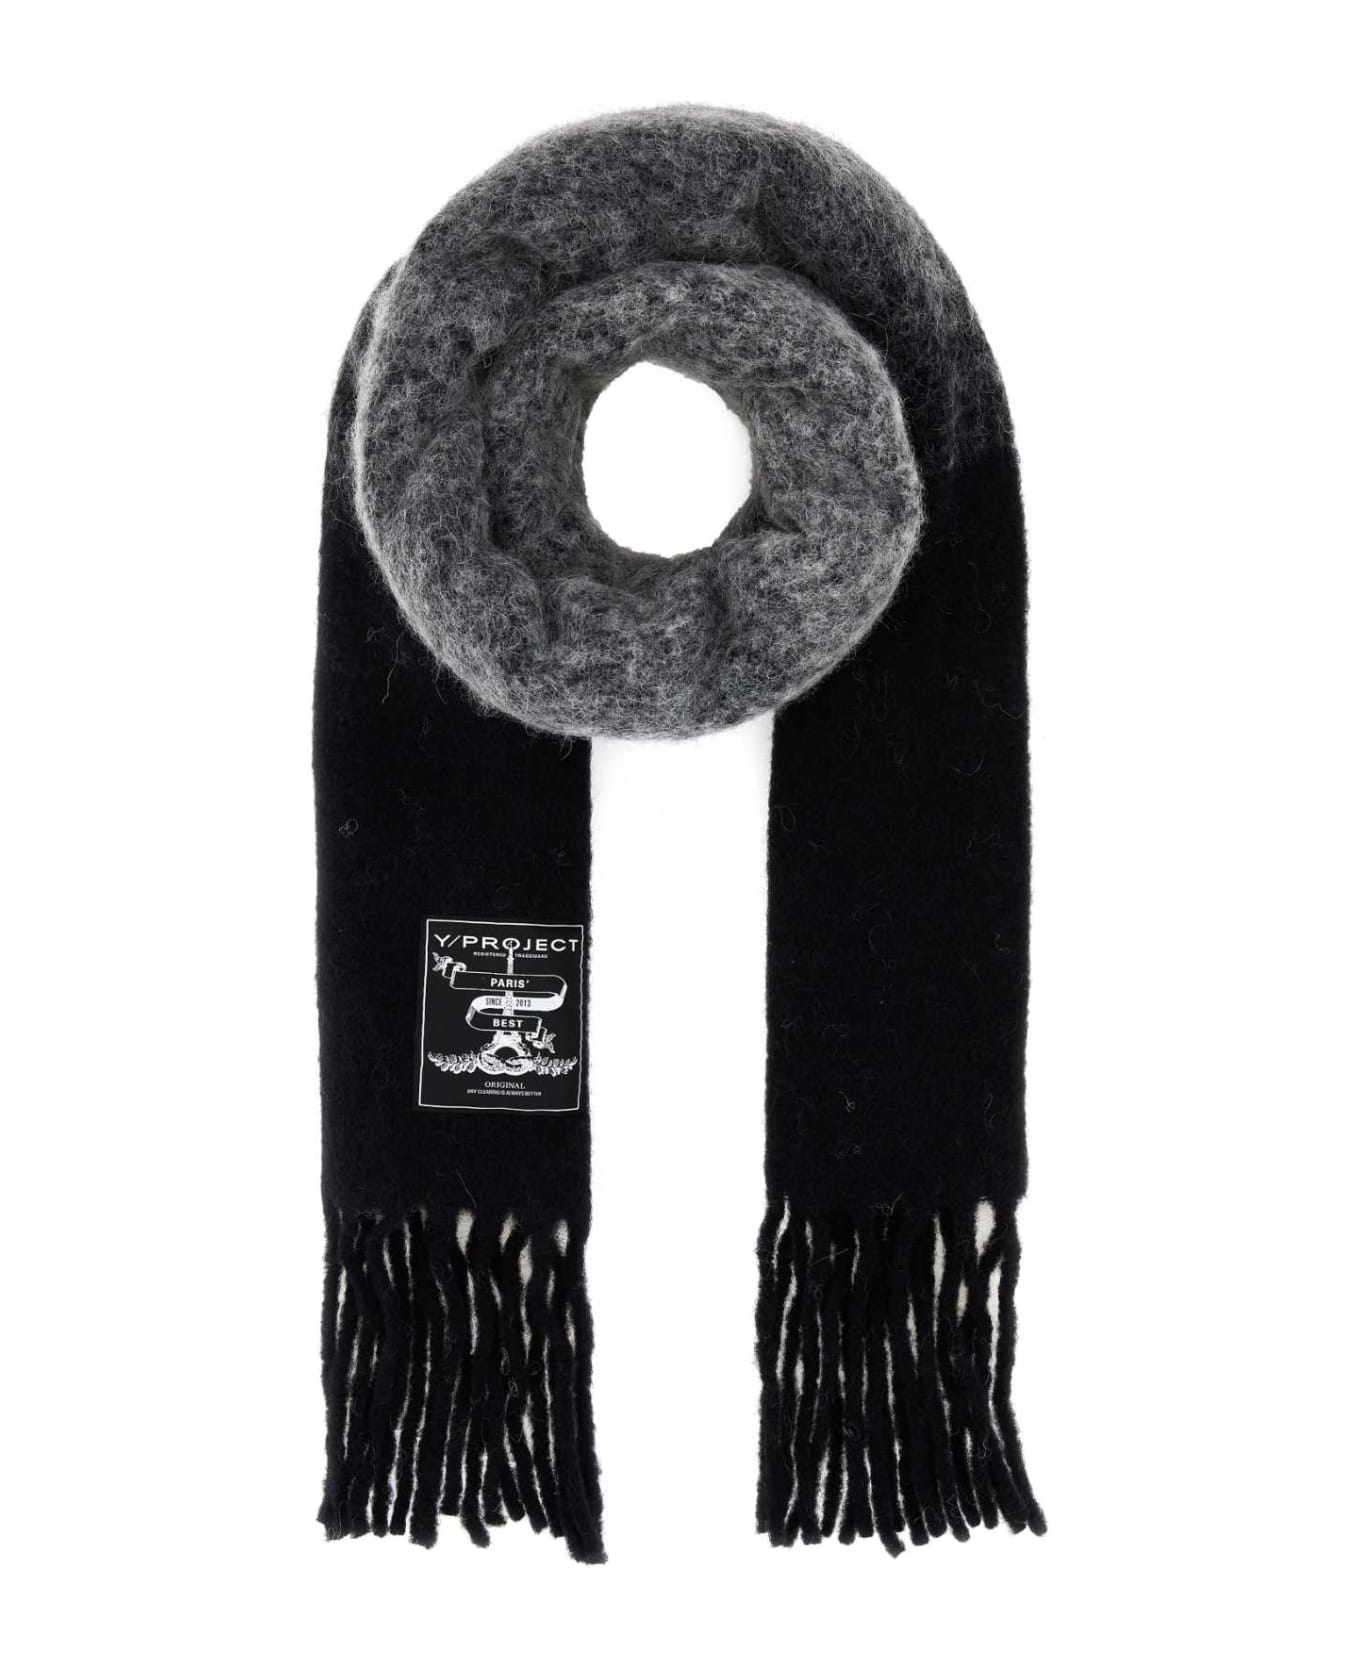 Y/Project Embroidered Mohair Blend Scarf - BLACK/GREY